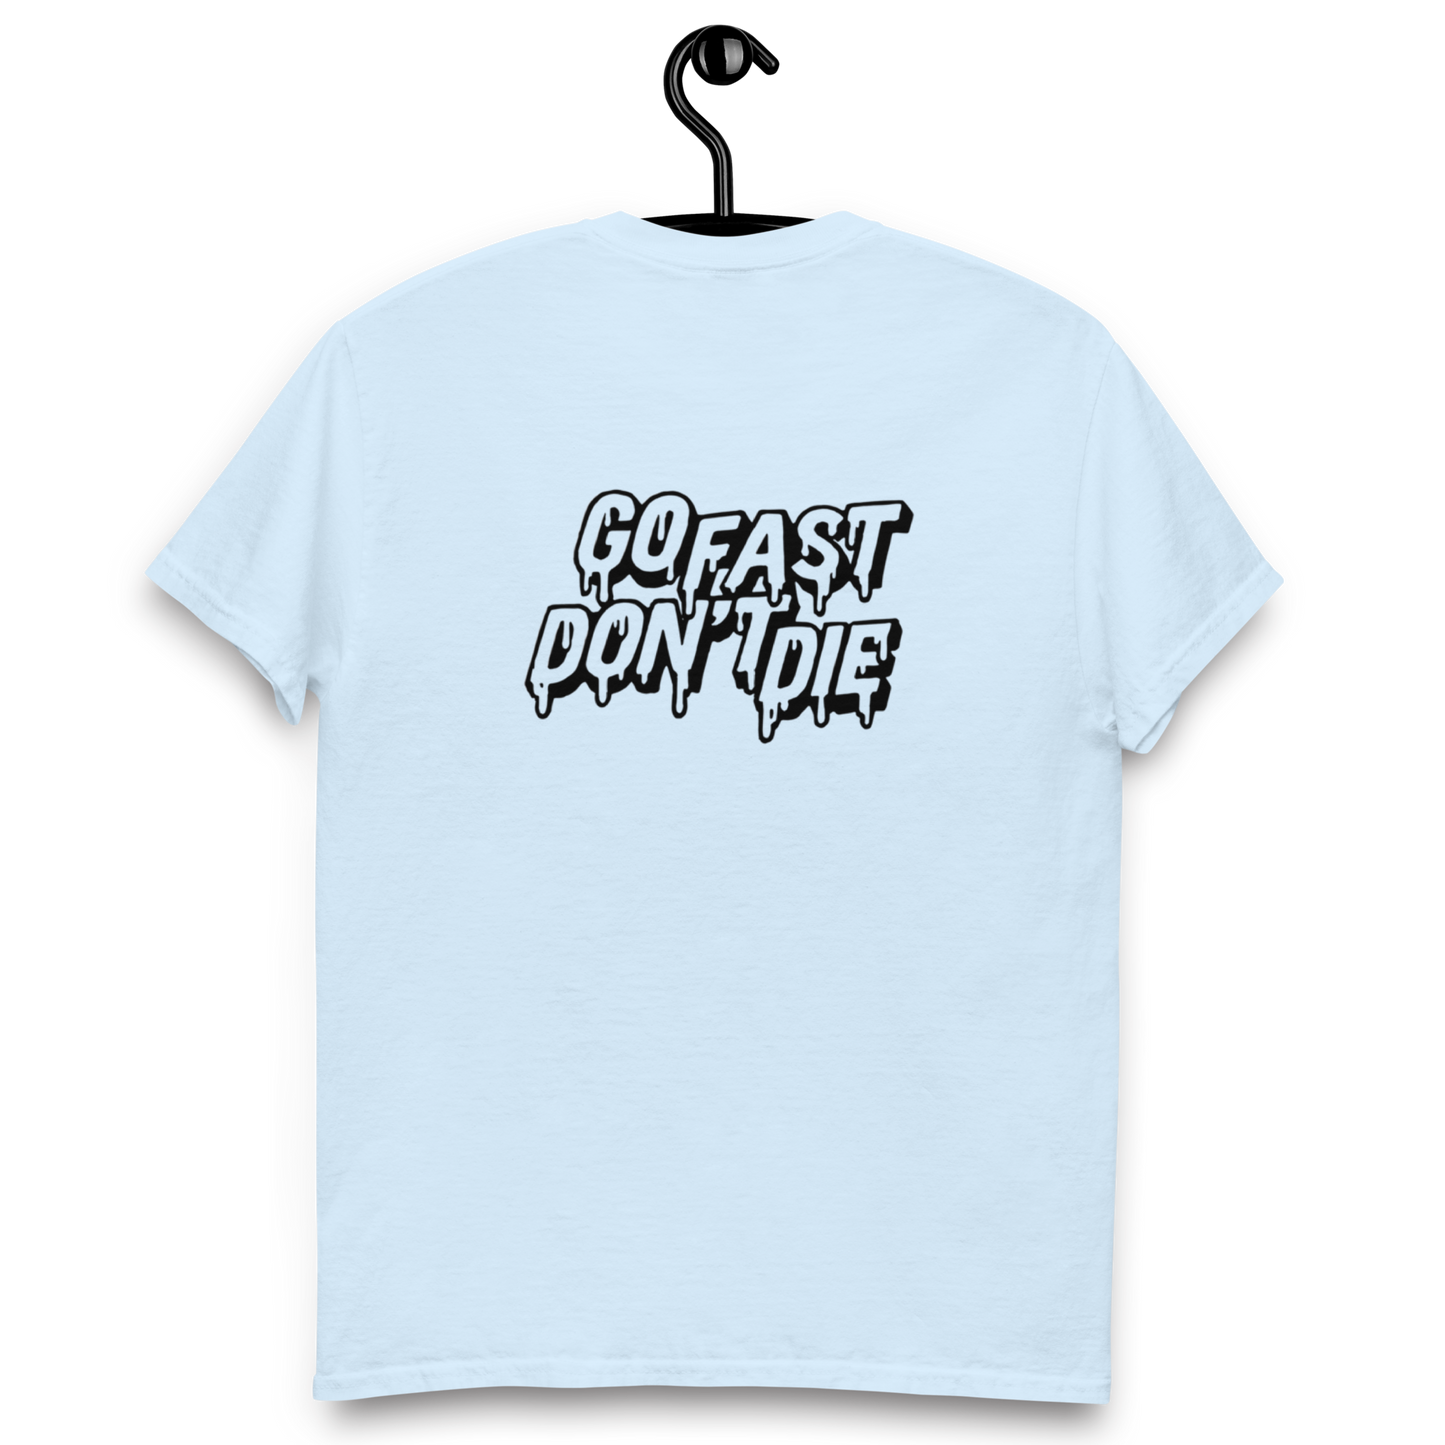 Go fast dont die t-shirt